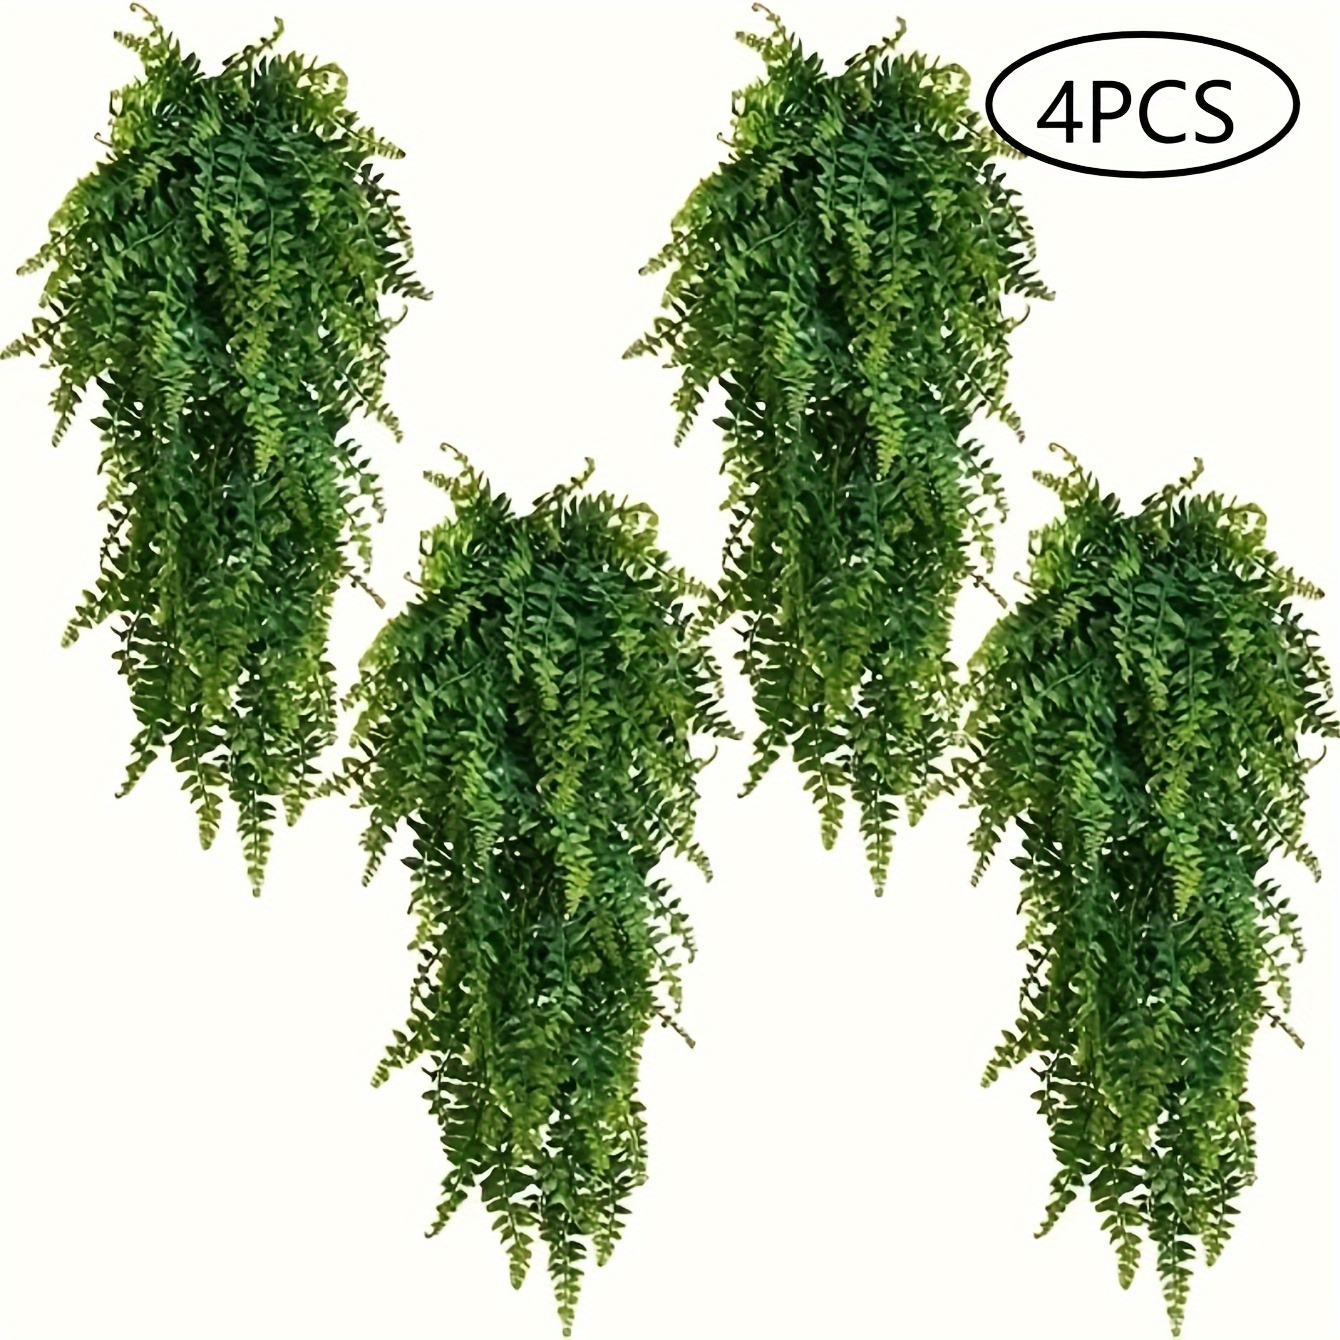 

3pcs Ultra-realistic Faux Hanging Plant Set - Artificial Fern Ivy Greenery - Uv Resistant, Beautiful Emulation Plants Low-maintenance Plastic Decor For Patio, Porch, Indoor Spaces